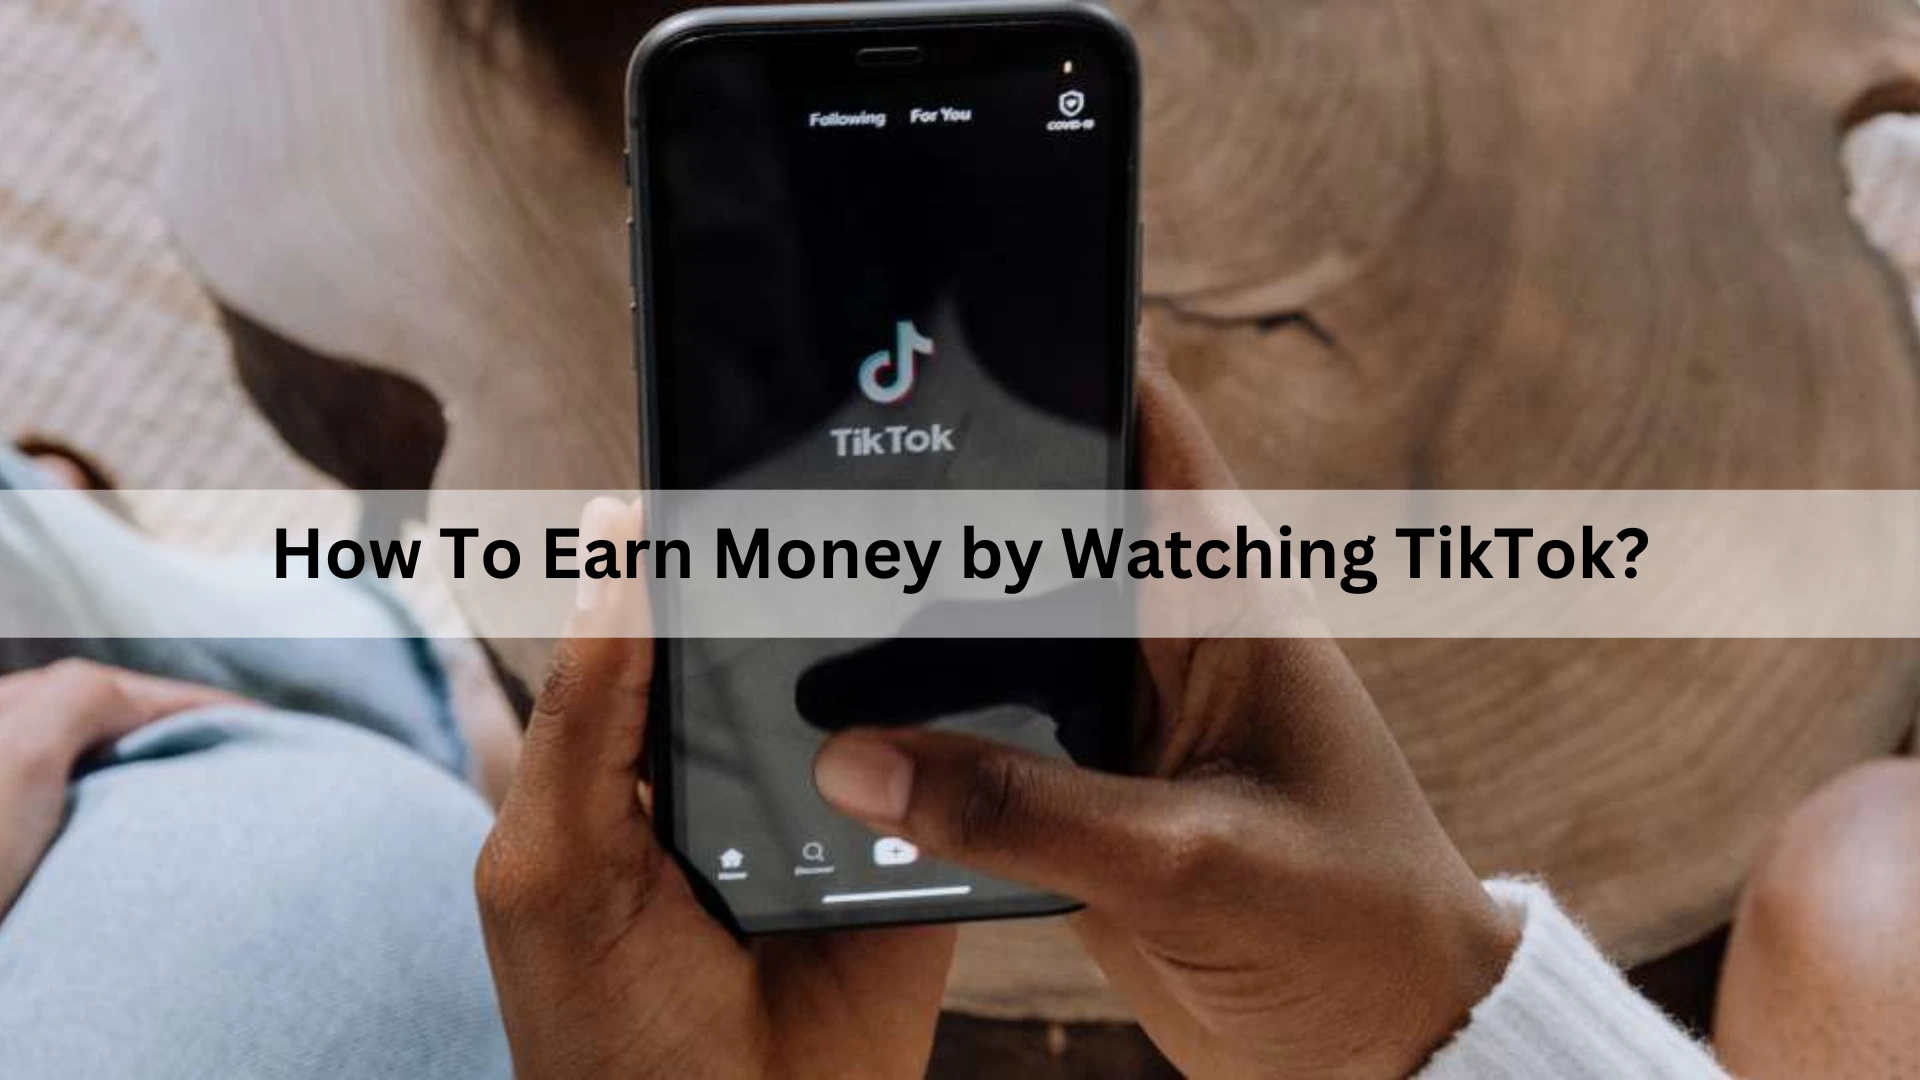 How To Earn Money by Watching TikTok